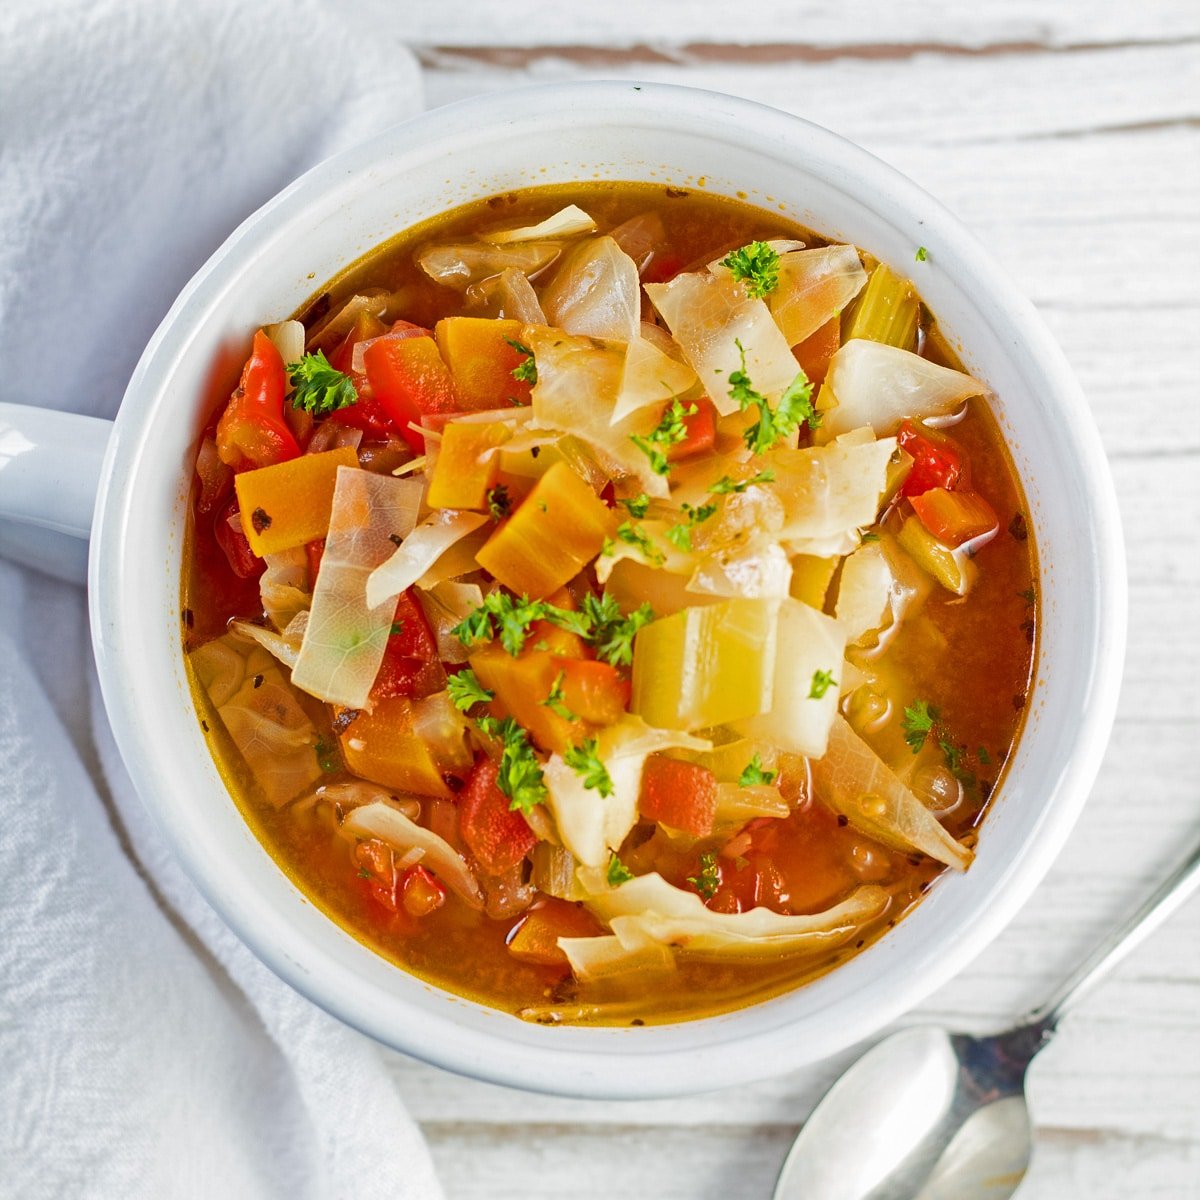 Best easy to make detox cabbage soup recipe loaded with vegetables in savory broth served in white bowl.